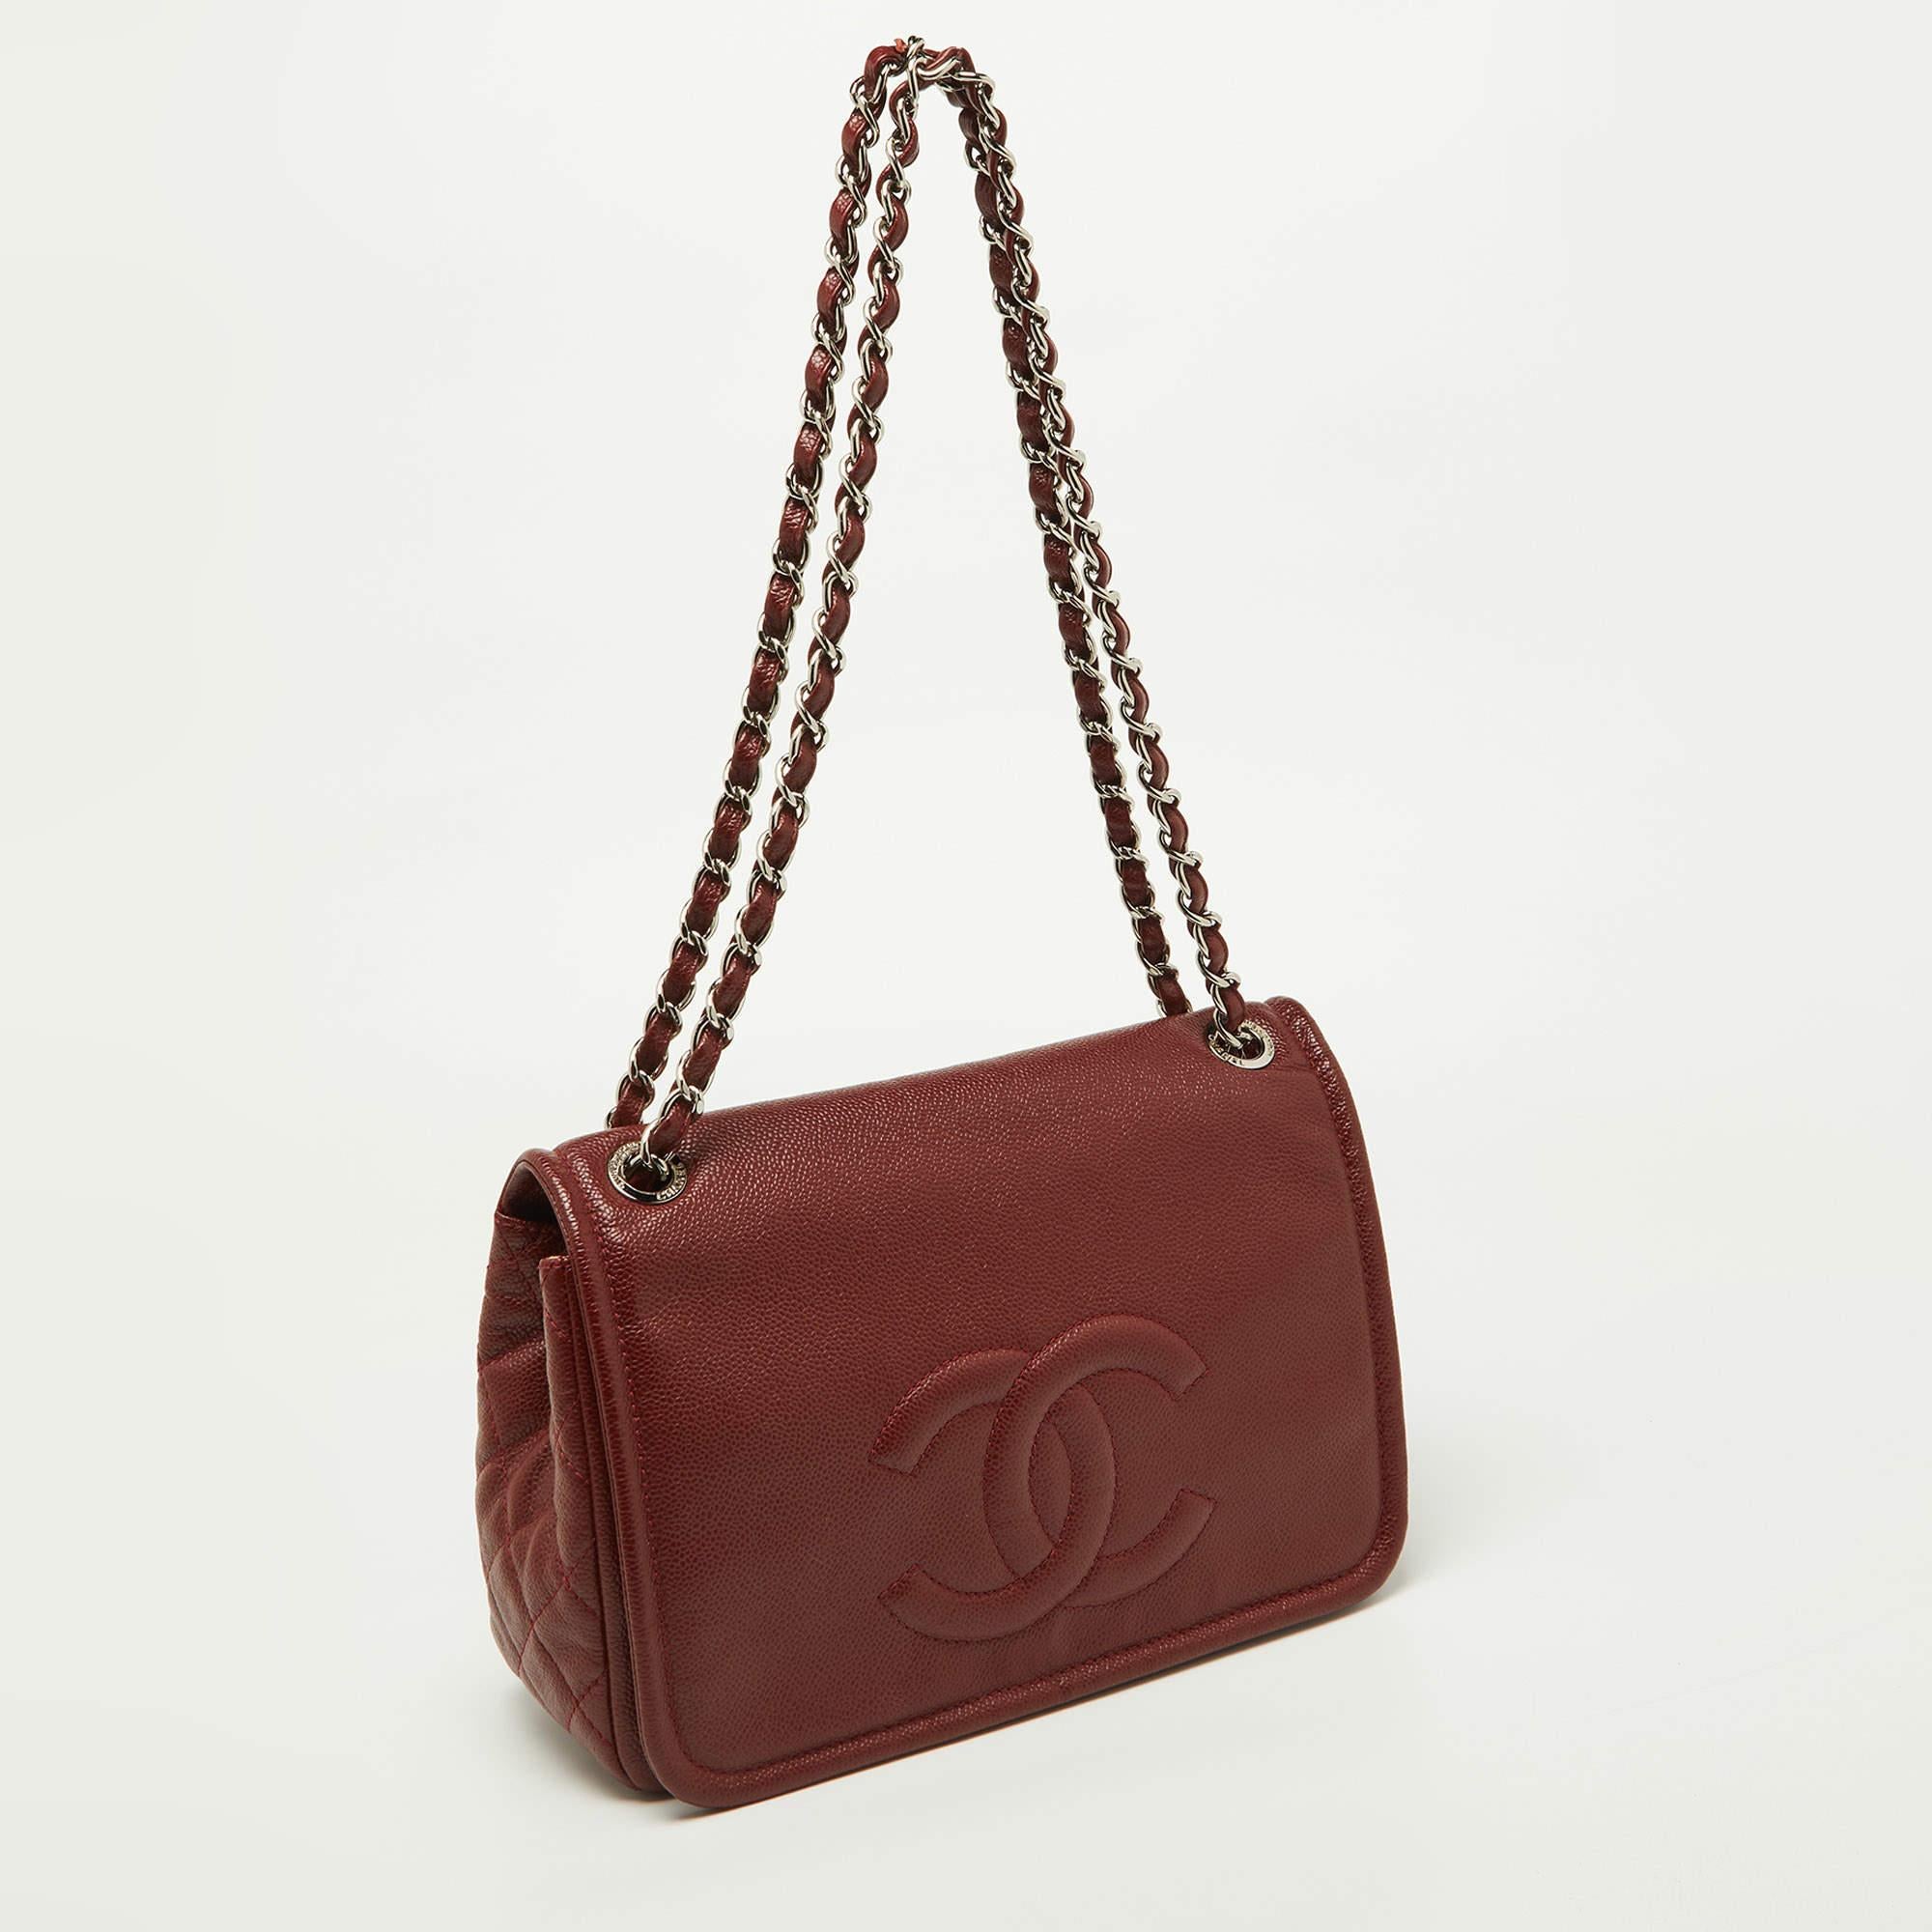 Chanel Dark Red Caviar Leather Large CC Timeless Flap Bag In Good Condition For Sale In Dubai, Al Qouz 2